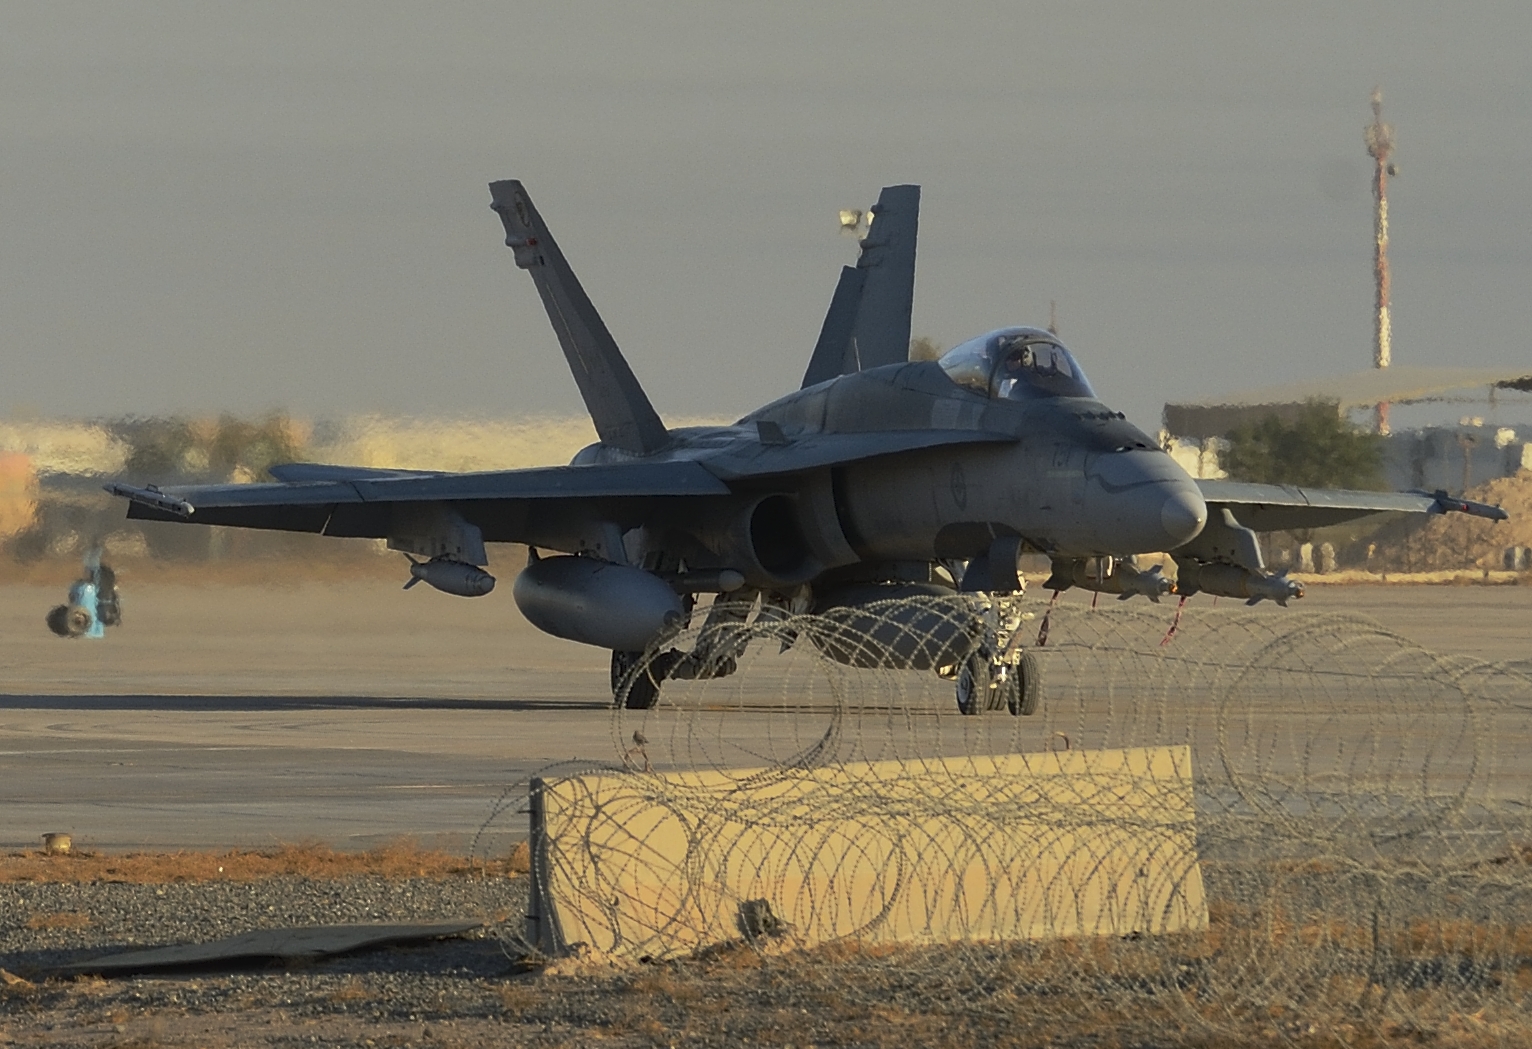 Kuwait. 9 November 2014 – A Canadian Armed Forces CF-18 fighter jet in Kuwait taxis to takeoff for a morning mission over Iraq during Operation IMPACT. (Photo IS2014-7535-02 by Canadian Forces Combat Camera, DND)